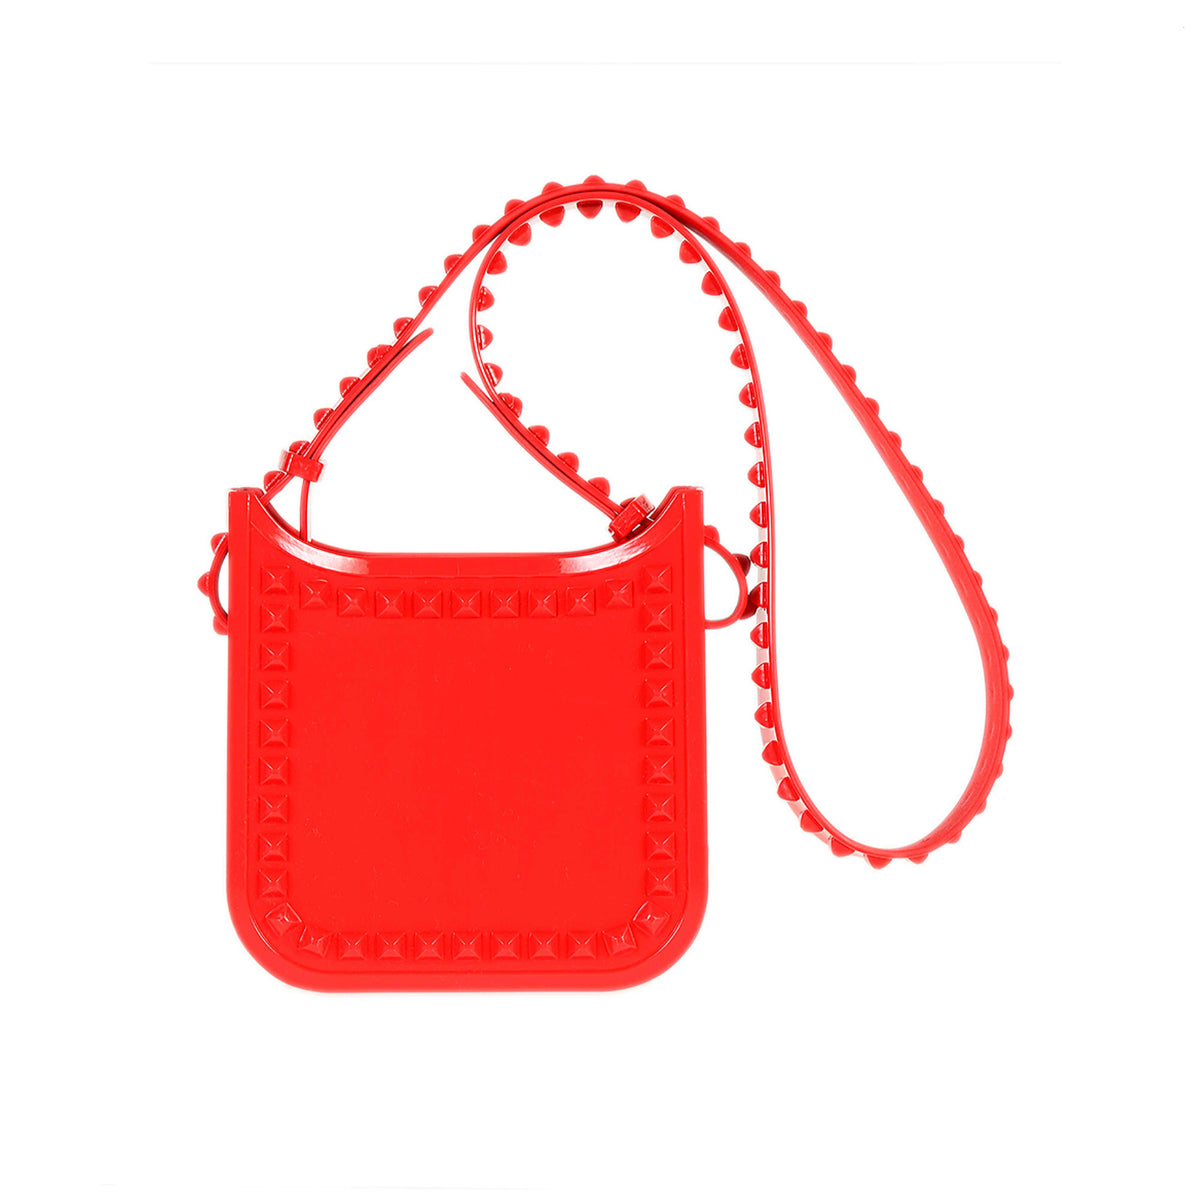 Red jelly Lisa small crossbody beach bags for women with studded straps